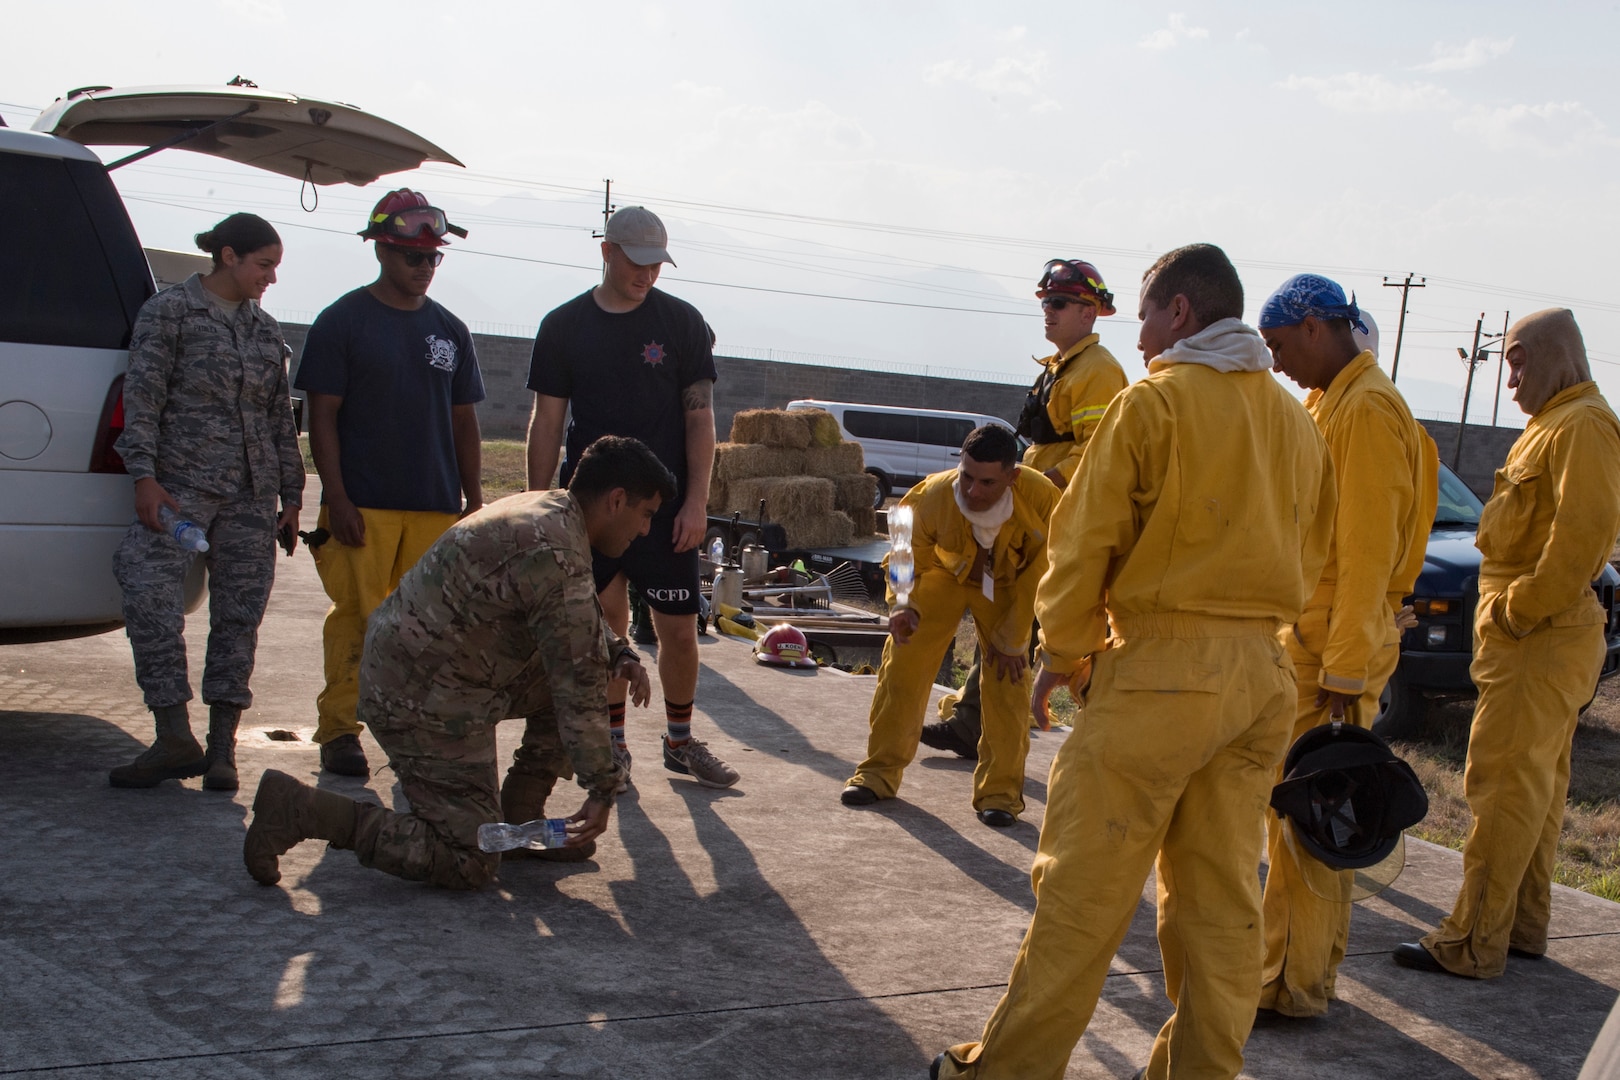 A group of U.S. Air Force and Central American firefighters relax after extinguishing a wildlands fire during the Central America Sharing Mutual Operational Knowledge and Experiences (CENTAM SMOKE) exercise, April 11, 2019, at Soto Cano Air Base, Honduras. CENTAM SMOKE brought together firefighters from Honduras, Costa Rica, Belize, Guatemala and El Salvador to train with U.S. Air Force members as well as develop bonds and understandings of one another’s culture with team building exercises. The weeklong training included aircraft and structural fires, vehicle extrication, and a firefighter combat challenge. (U.S. Air Force photo by Staff Sgt. Eric Summers Jr.)